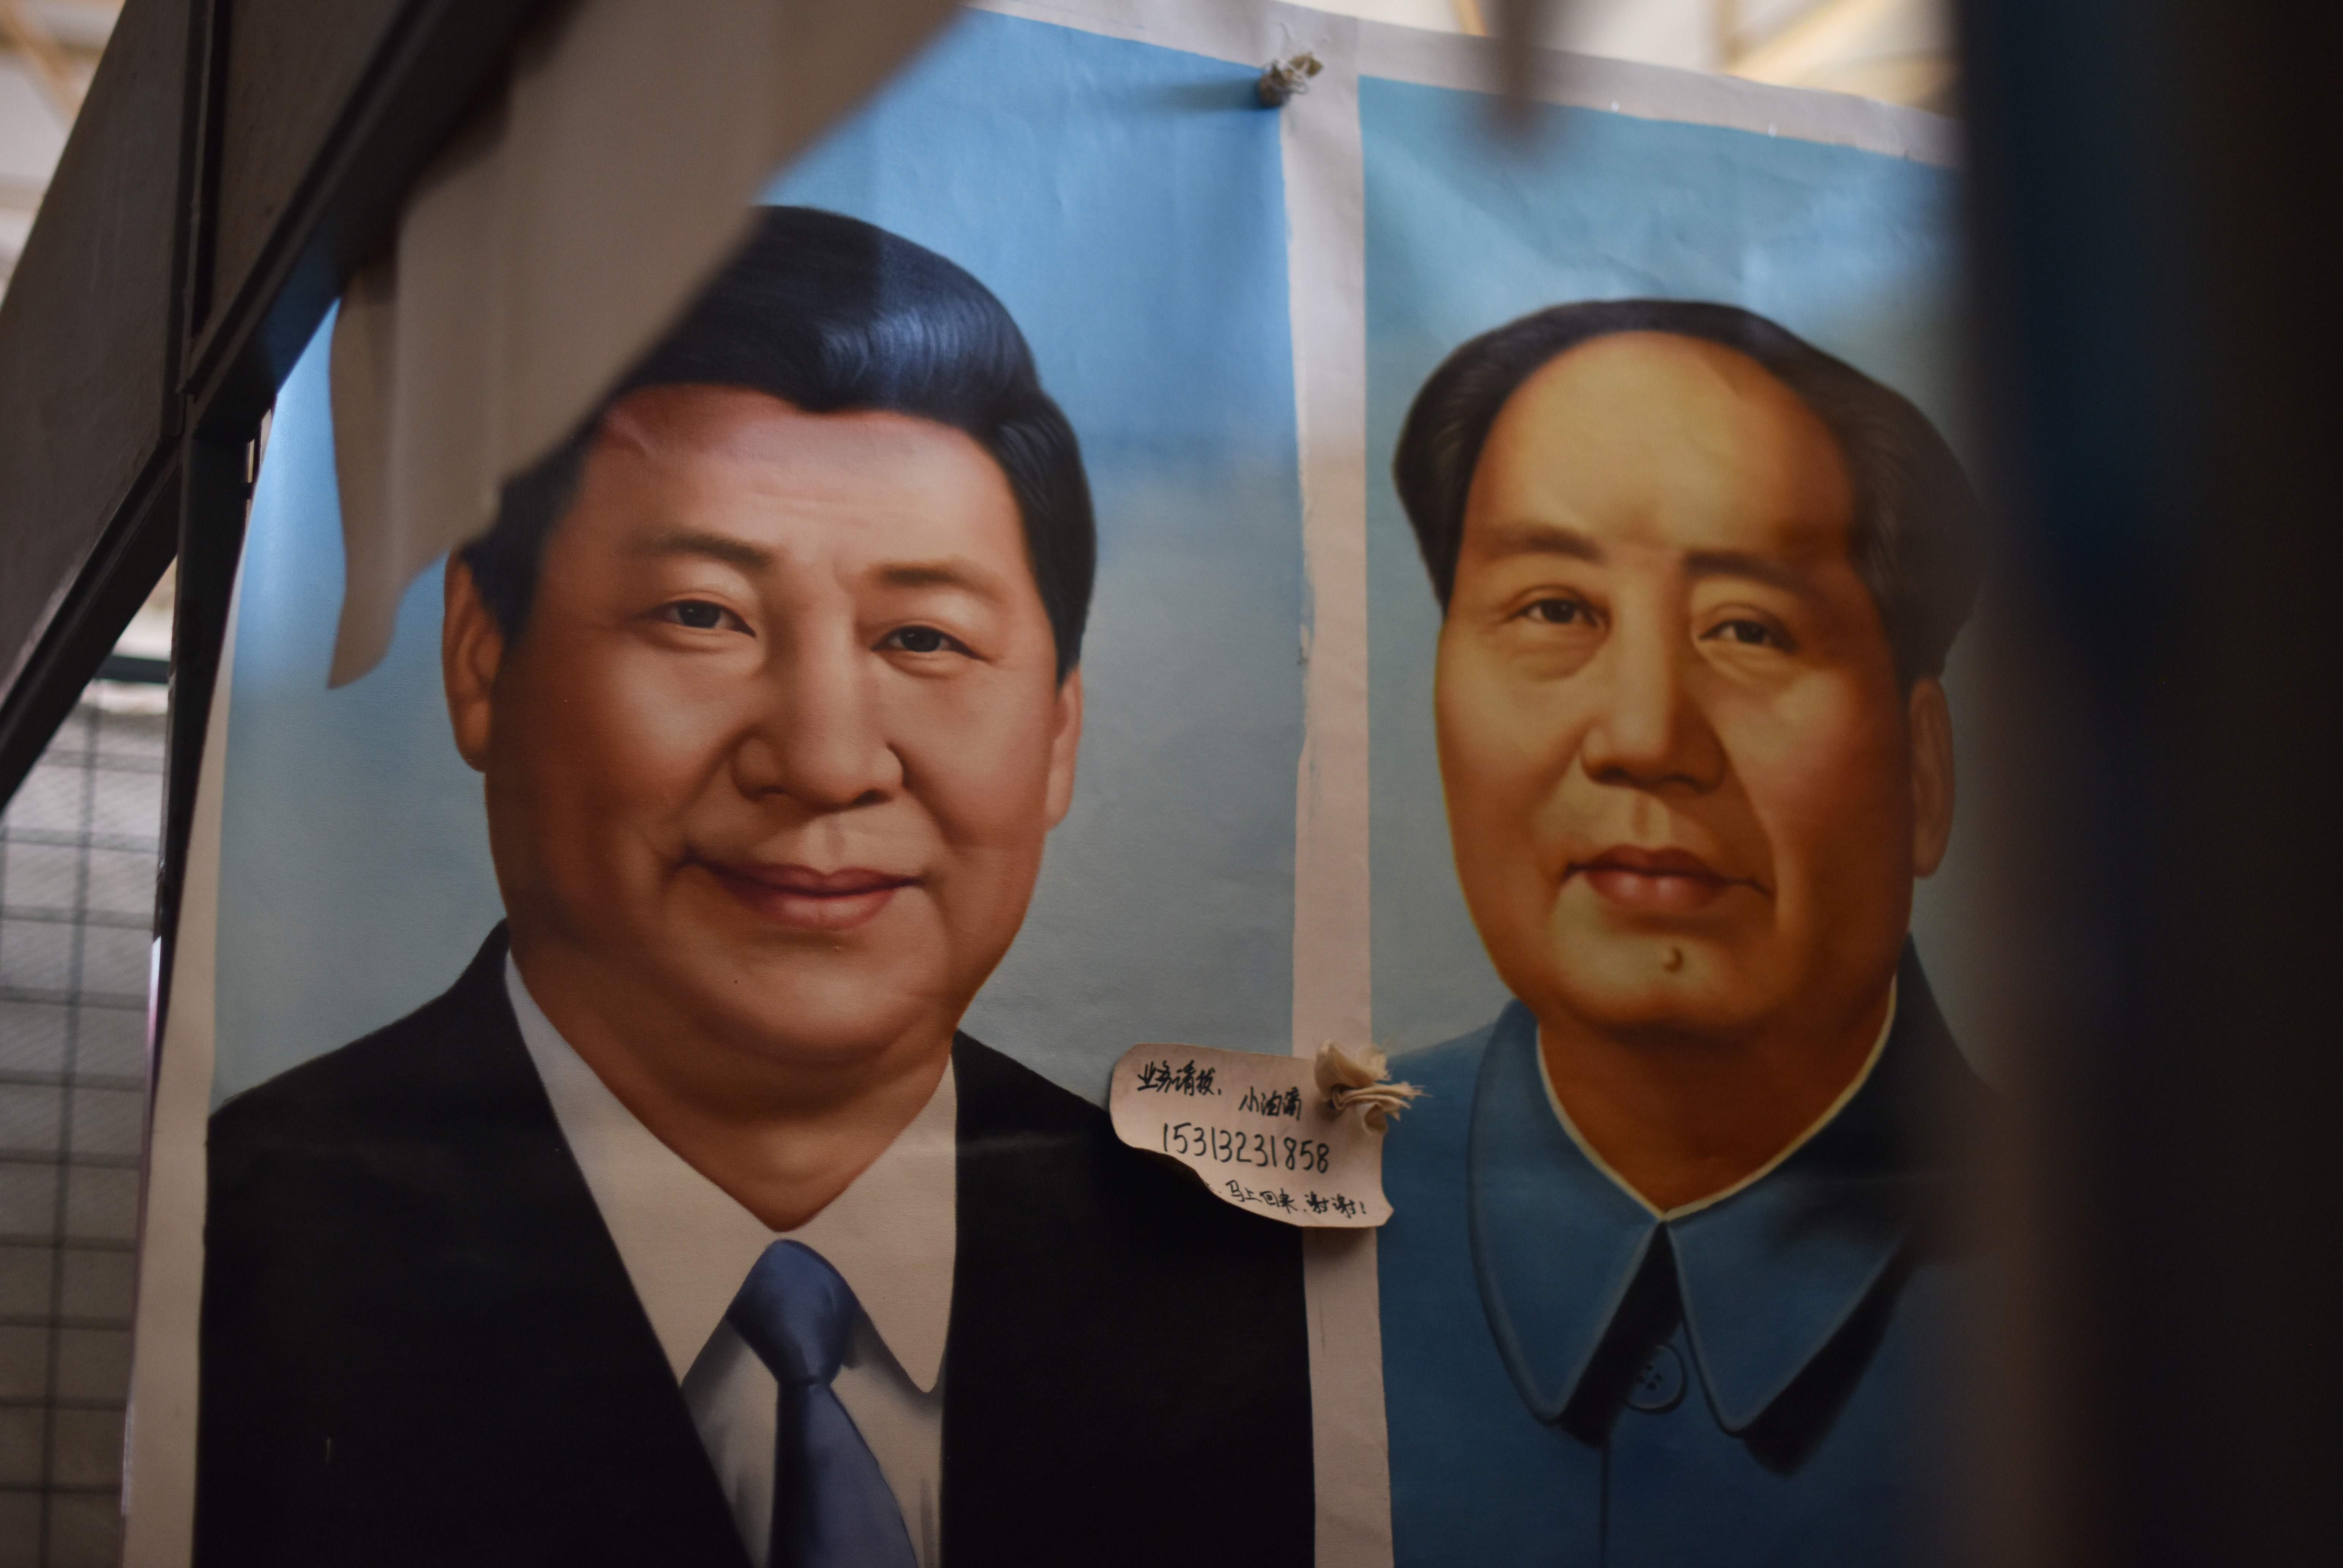 Painted portraits of President Xi Jinping and Mao Zedong for sale at a market in Beijing in September, ahead of the 19th party congress in October. Photo: AFP